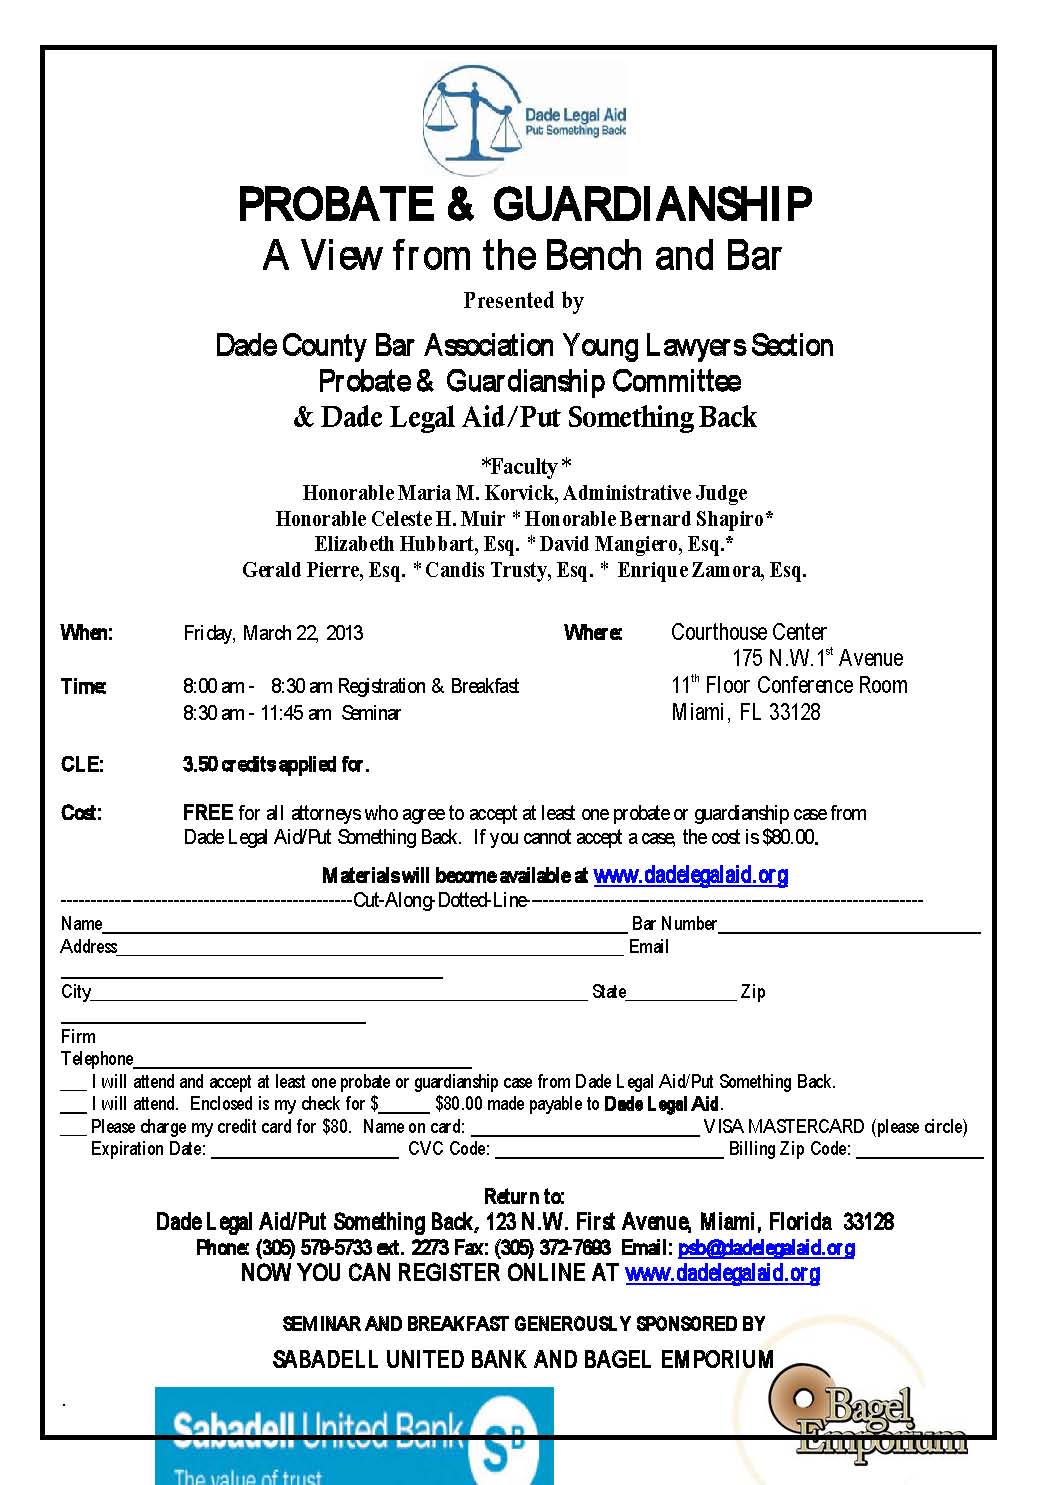 Register for Probate & Guardianship: A View from the Bench and Bar